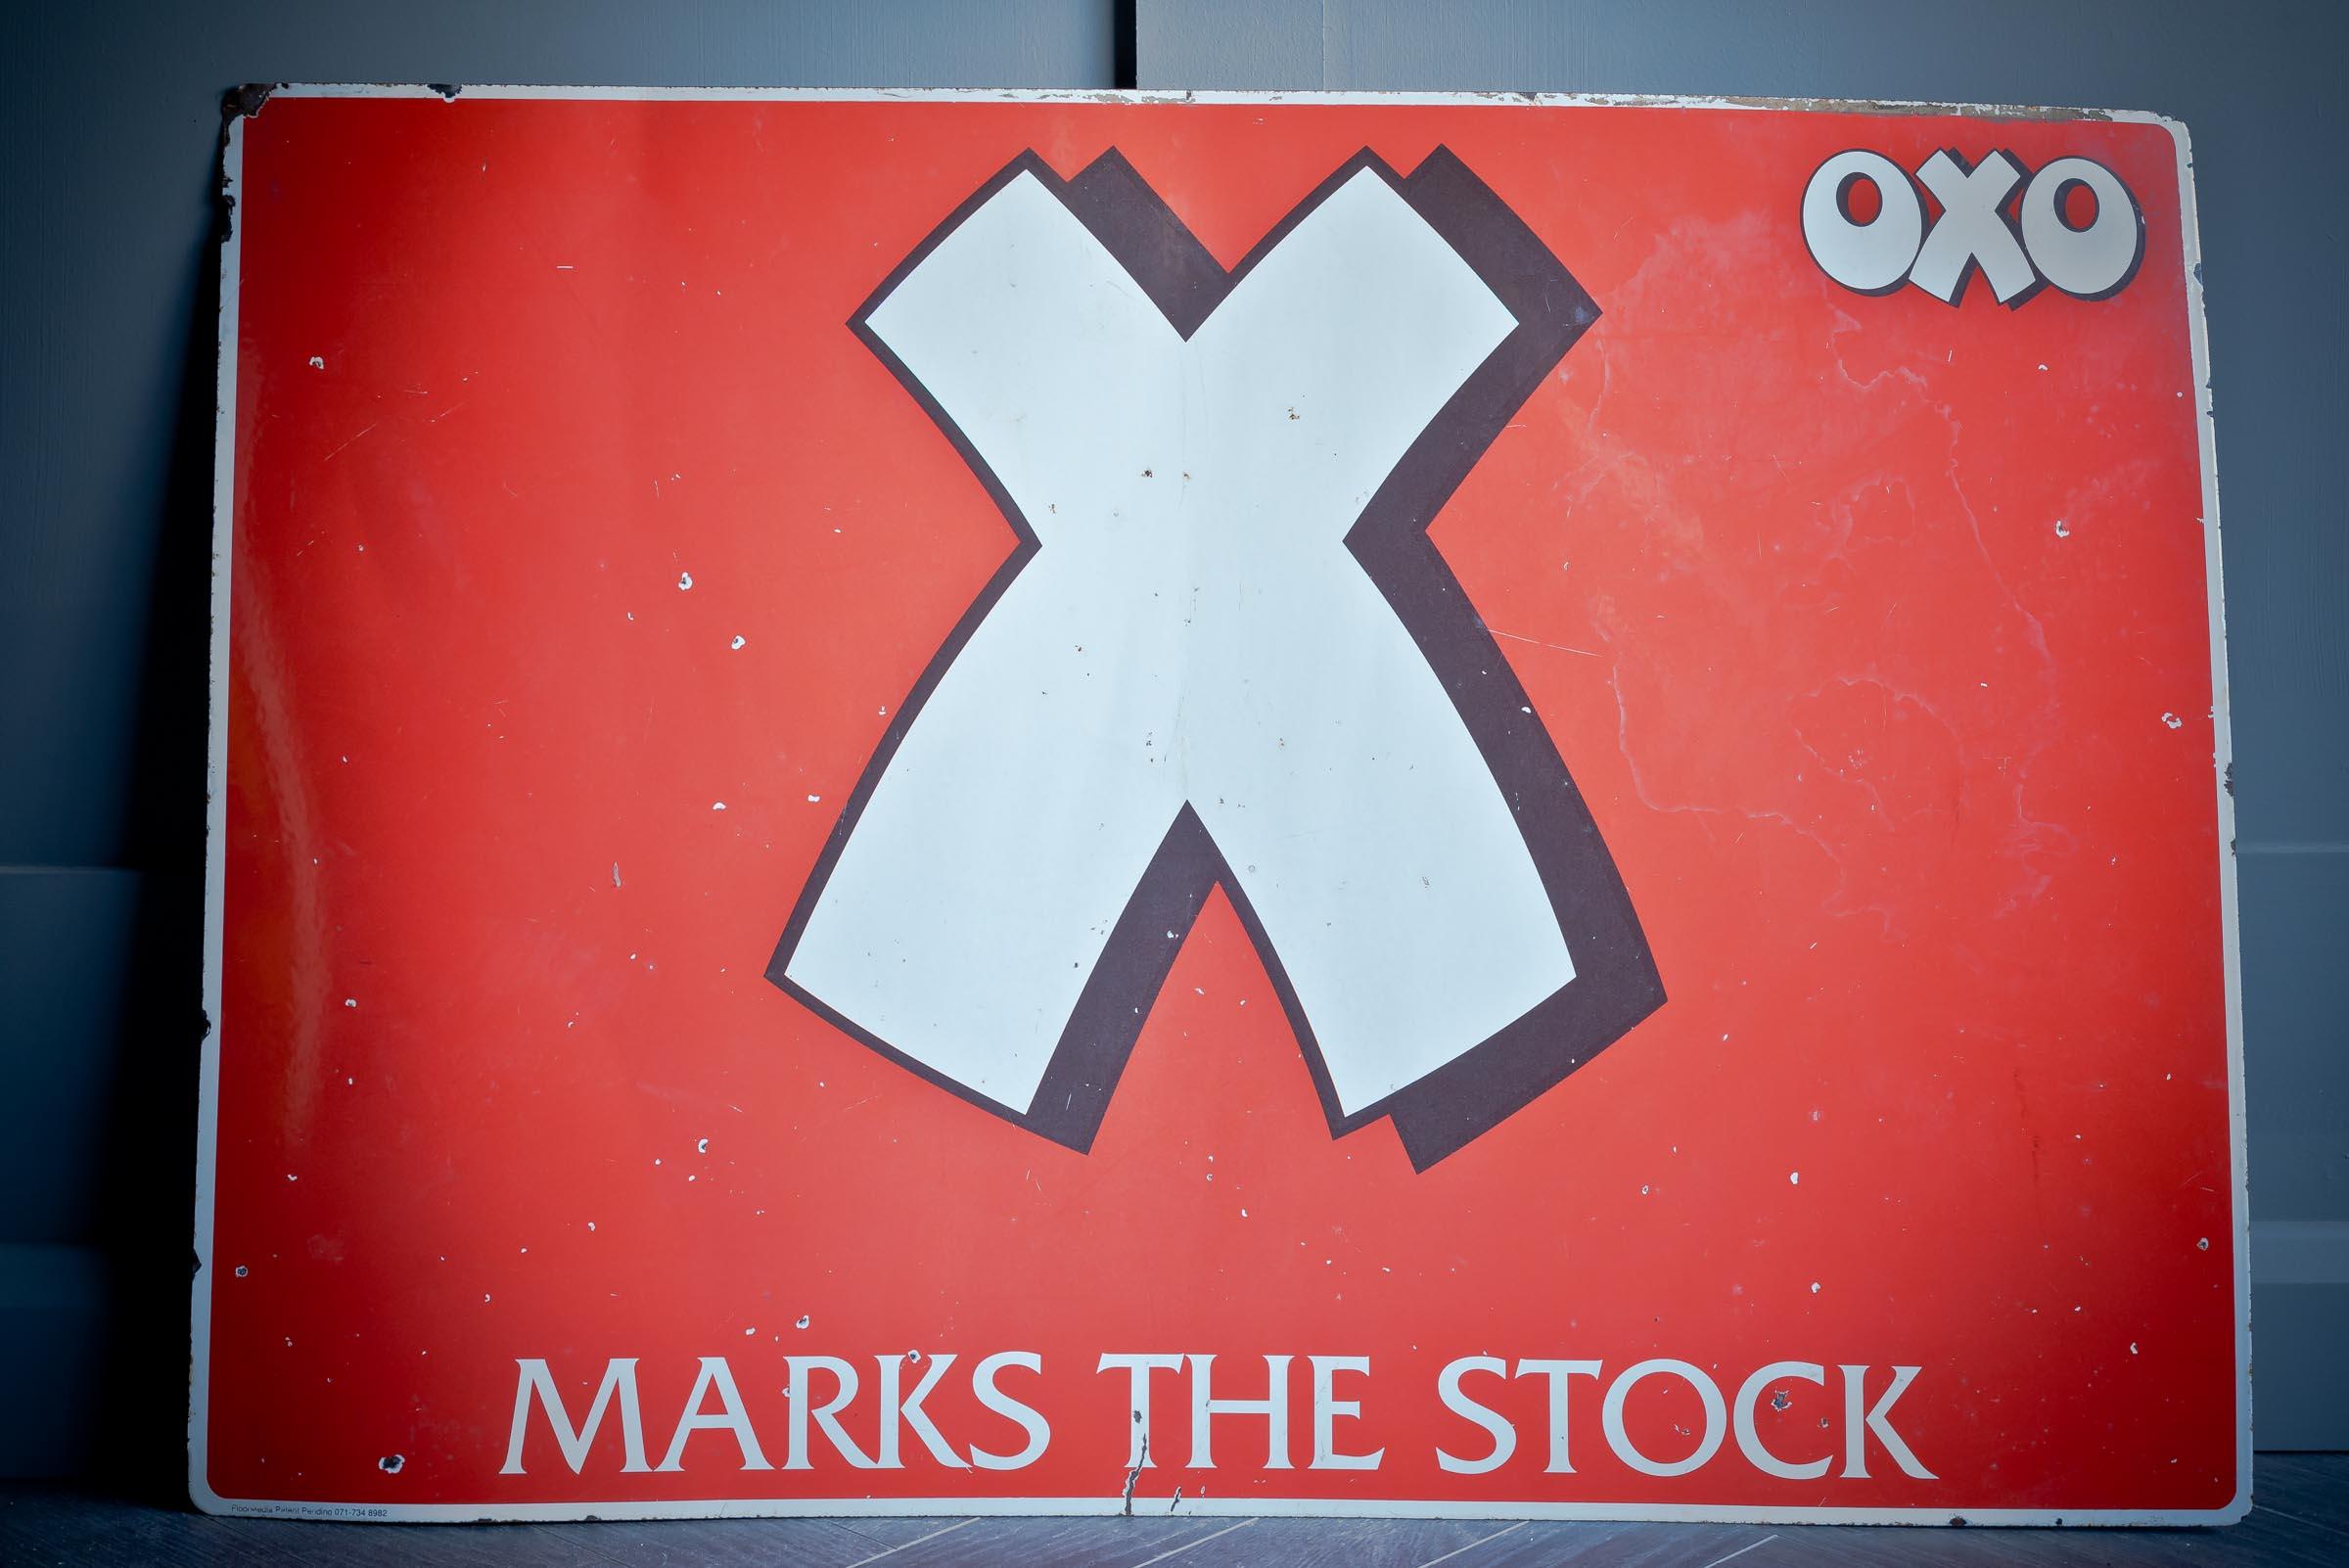 Amazing Oxo advertising sign. Bright red background with a white X and the clever play on words 